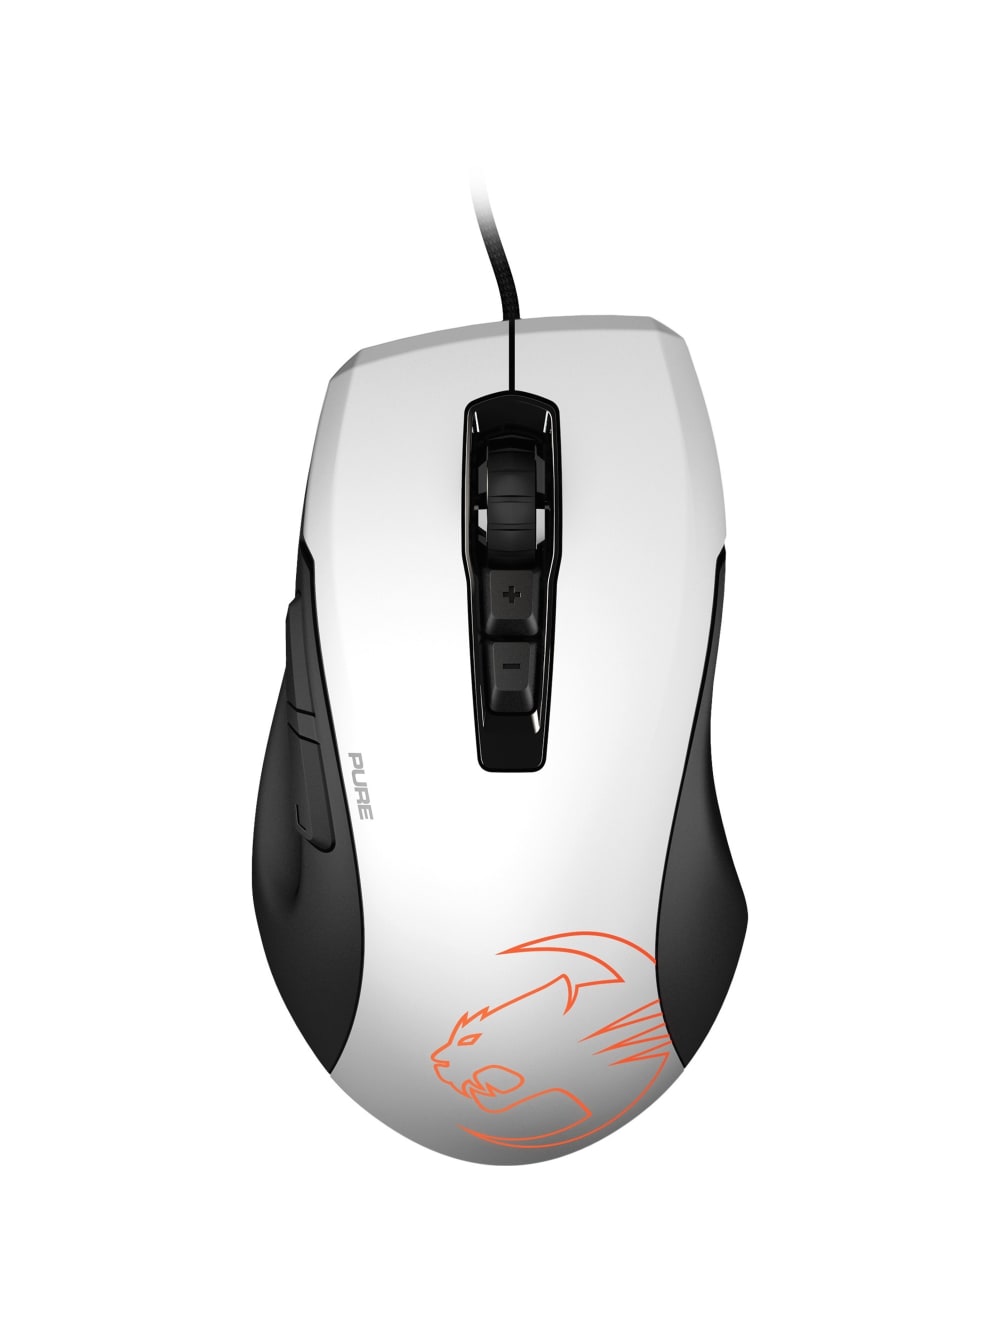 Roccat Kone Emp Software : Roccat Kone Pure Owl Eye Review Page 3 Of 4 Aph Networks - The roccat ...